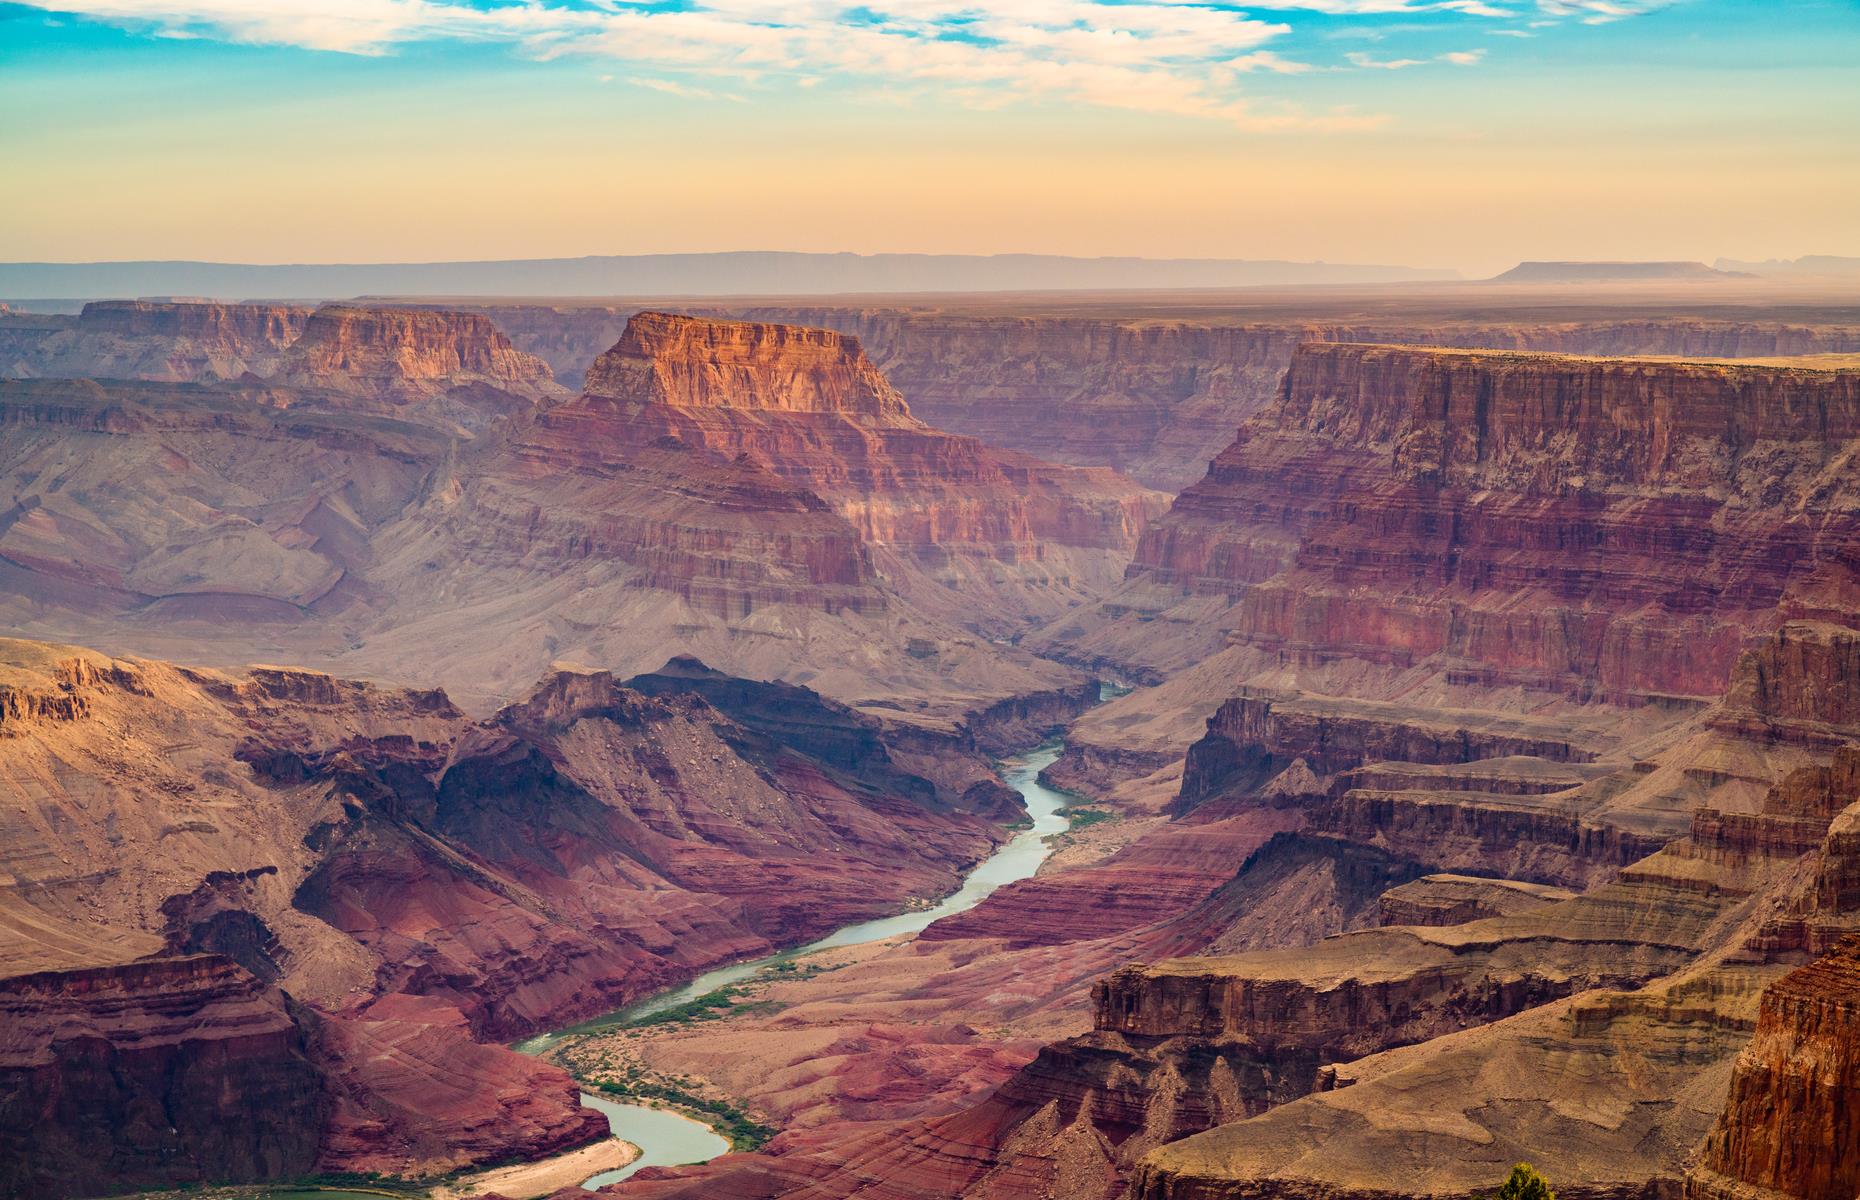 <p>The granddaddy of them all is high on many people’s bucket lists for good reason. Whether viewed from the terrifying glass-floored <a href="https://grandcanyonwest.com/explore/west-rim/skywalk-eagle-point/">Skywalk</a>, which curves 70 feet (21.3m) above the void, from a helicopter or from one of the many overlooks around the rim, there’s one guarantee: you’ll feel tiny. The <a href="https://www.nps.gov/grca/planyourvisit/index.htm">South Rim</a> is considered the best for sunrise – and those blazing reds and oranges are worth dragging yourself up for. </p>  <p><strong><a href="https://www.loveexploring.com/galleries/86466/the-worlds-stunning-sunrises-will-brighten-up-your-day?page=1">The world's most stunning sunrises will brighten up your day</a></strong></p>